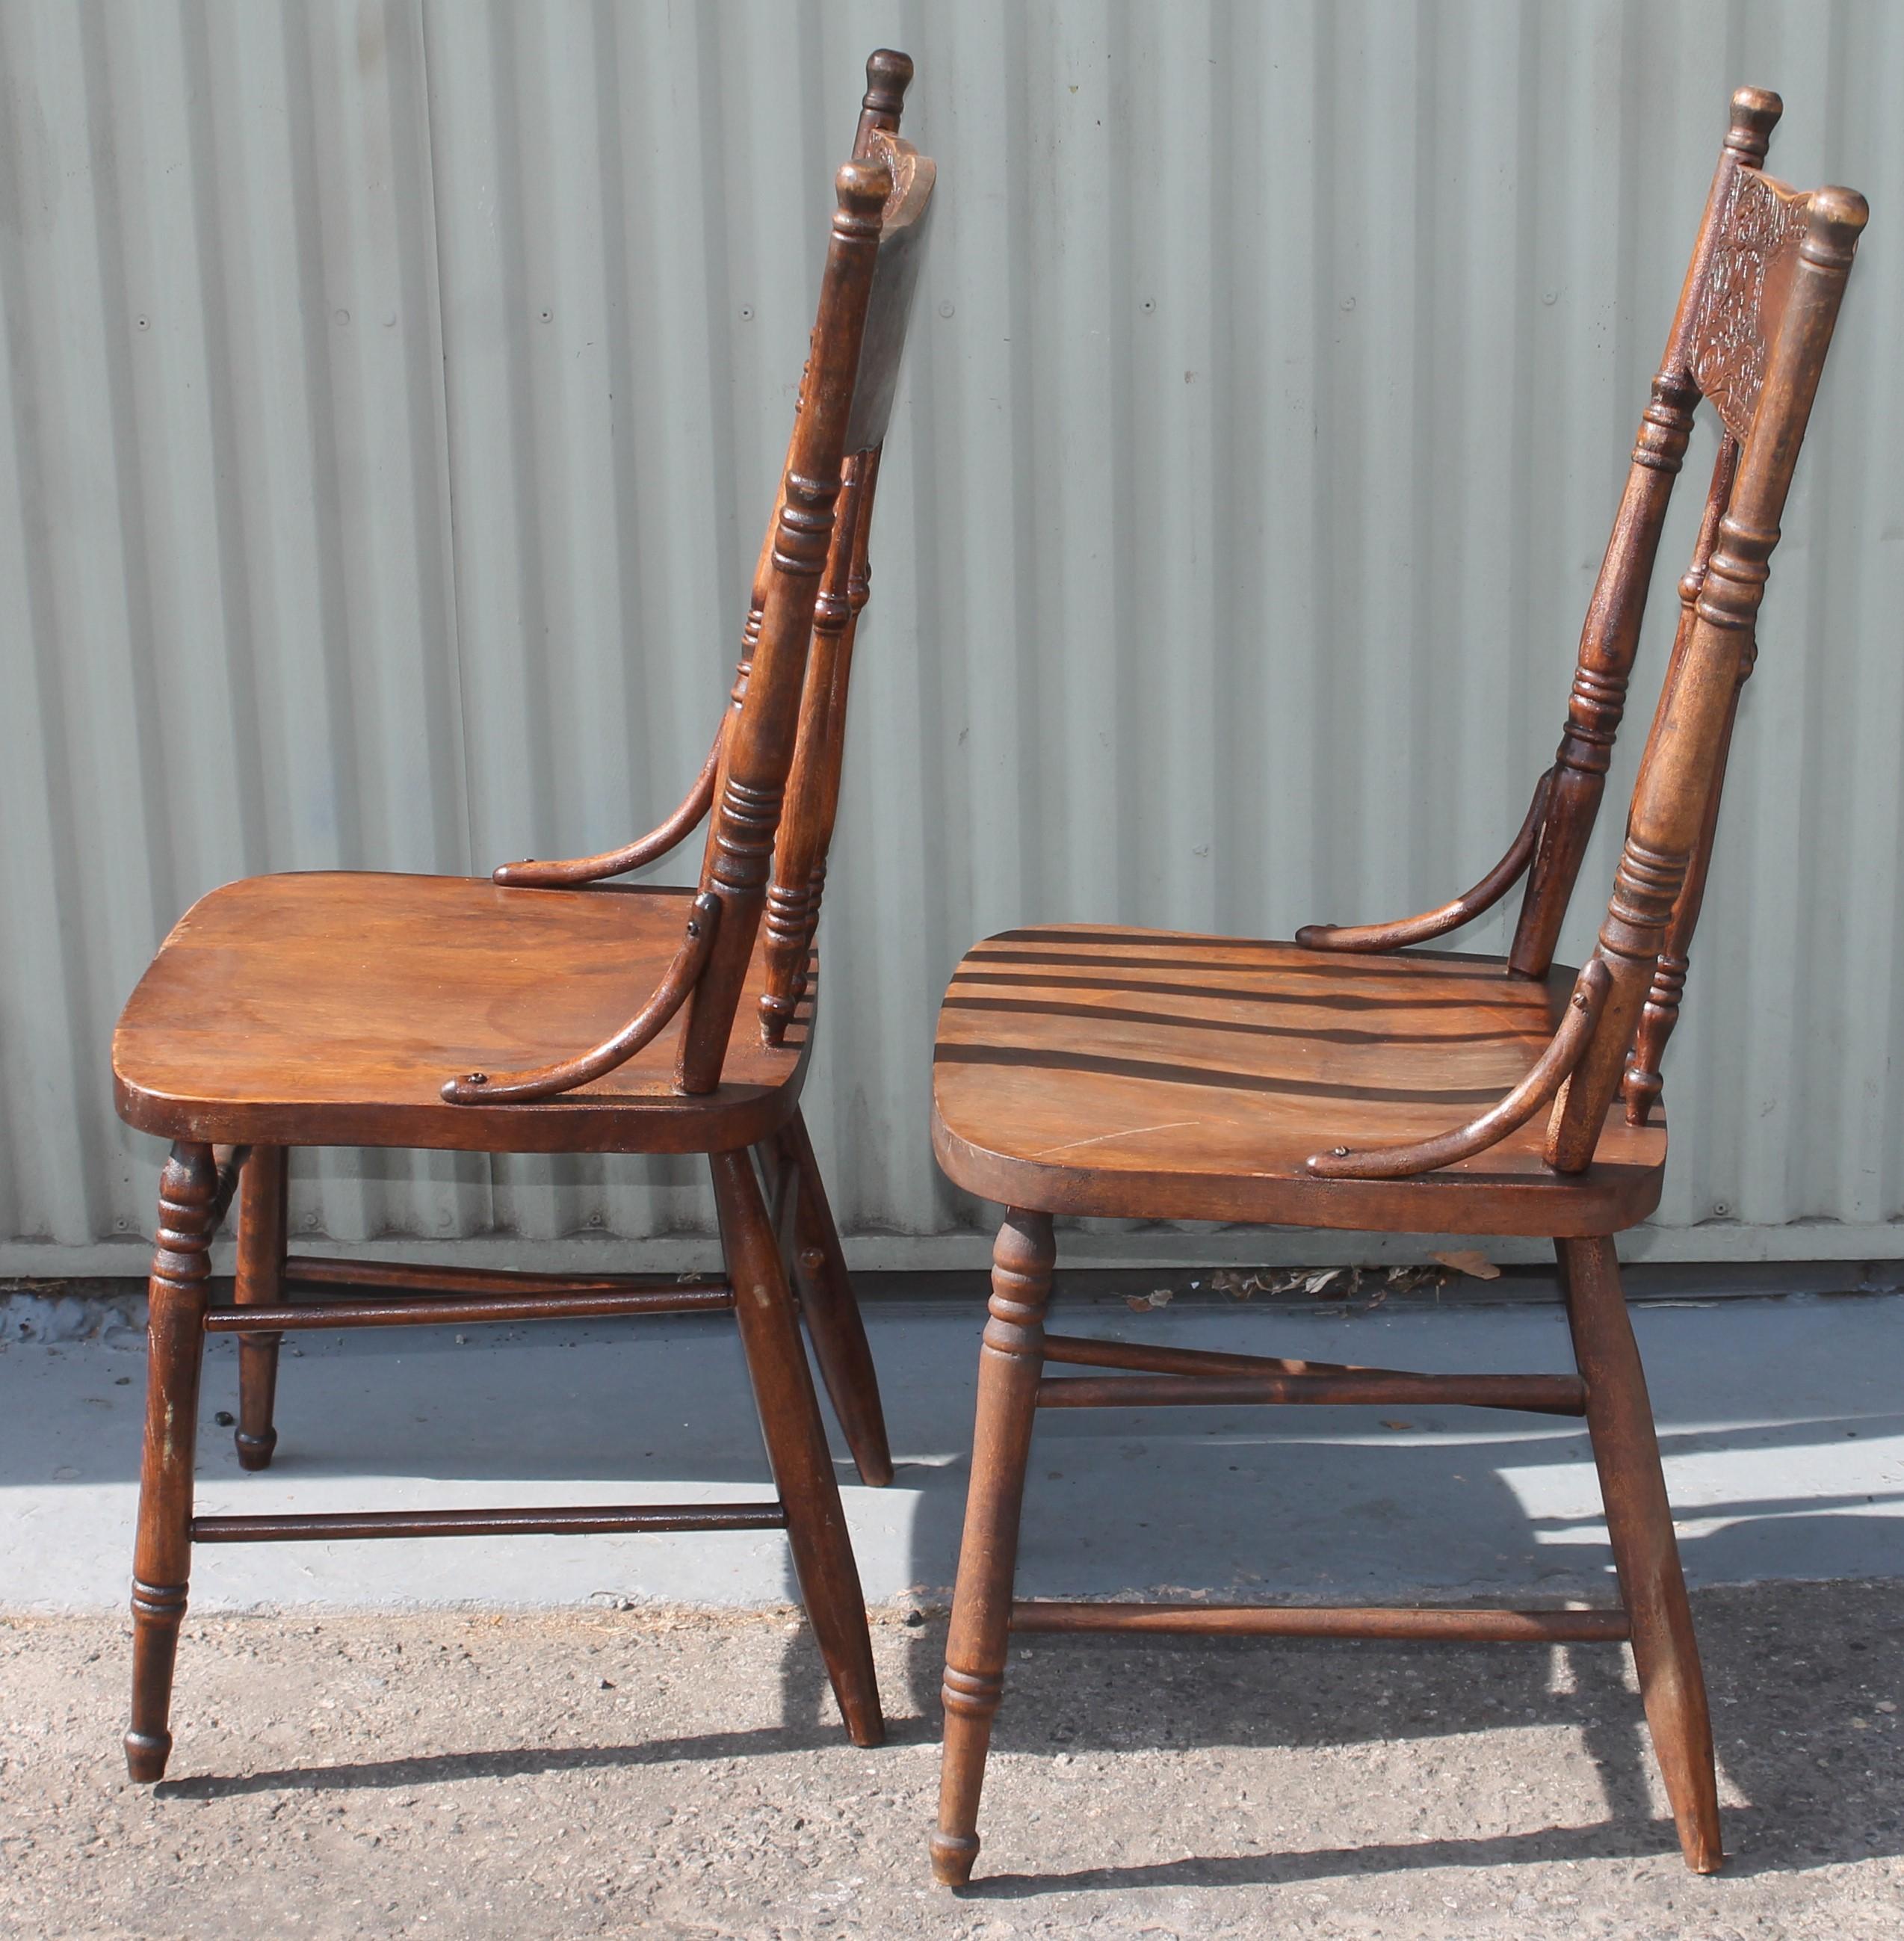 19thc original old surface pressed back chairs in fine sturdy condition. The set of a great cowboy or Ralph Lauren Double RL look !!! Fantastic condition and very comfortable.